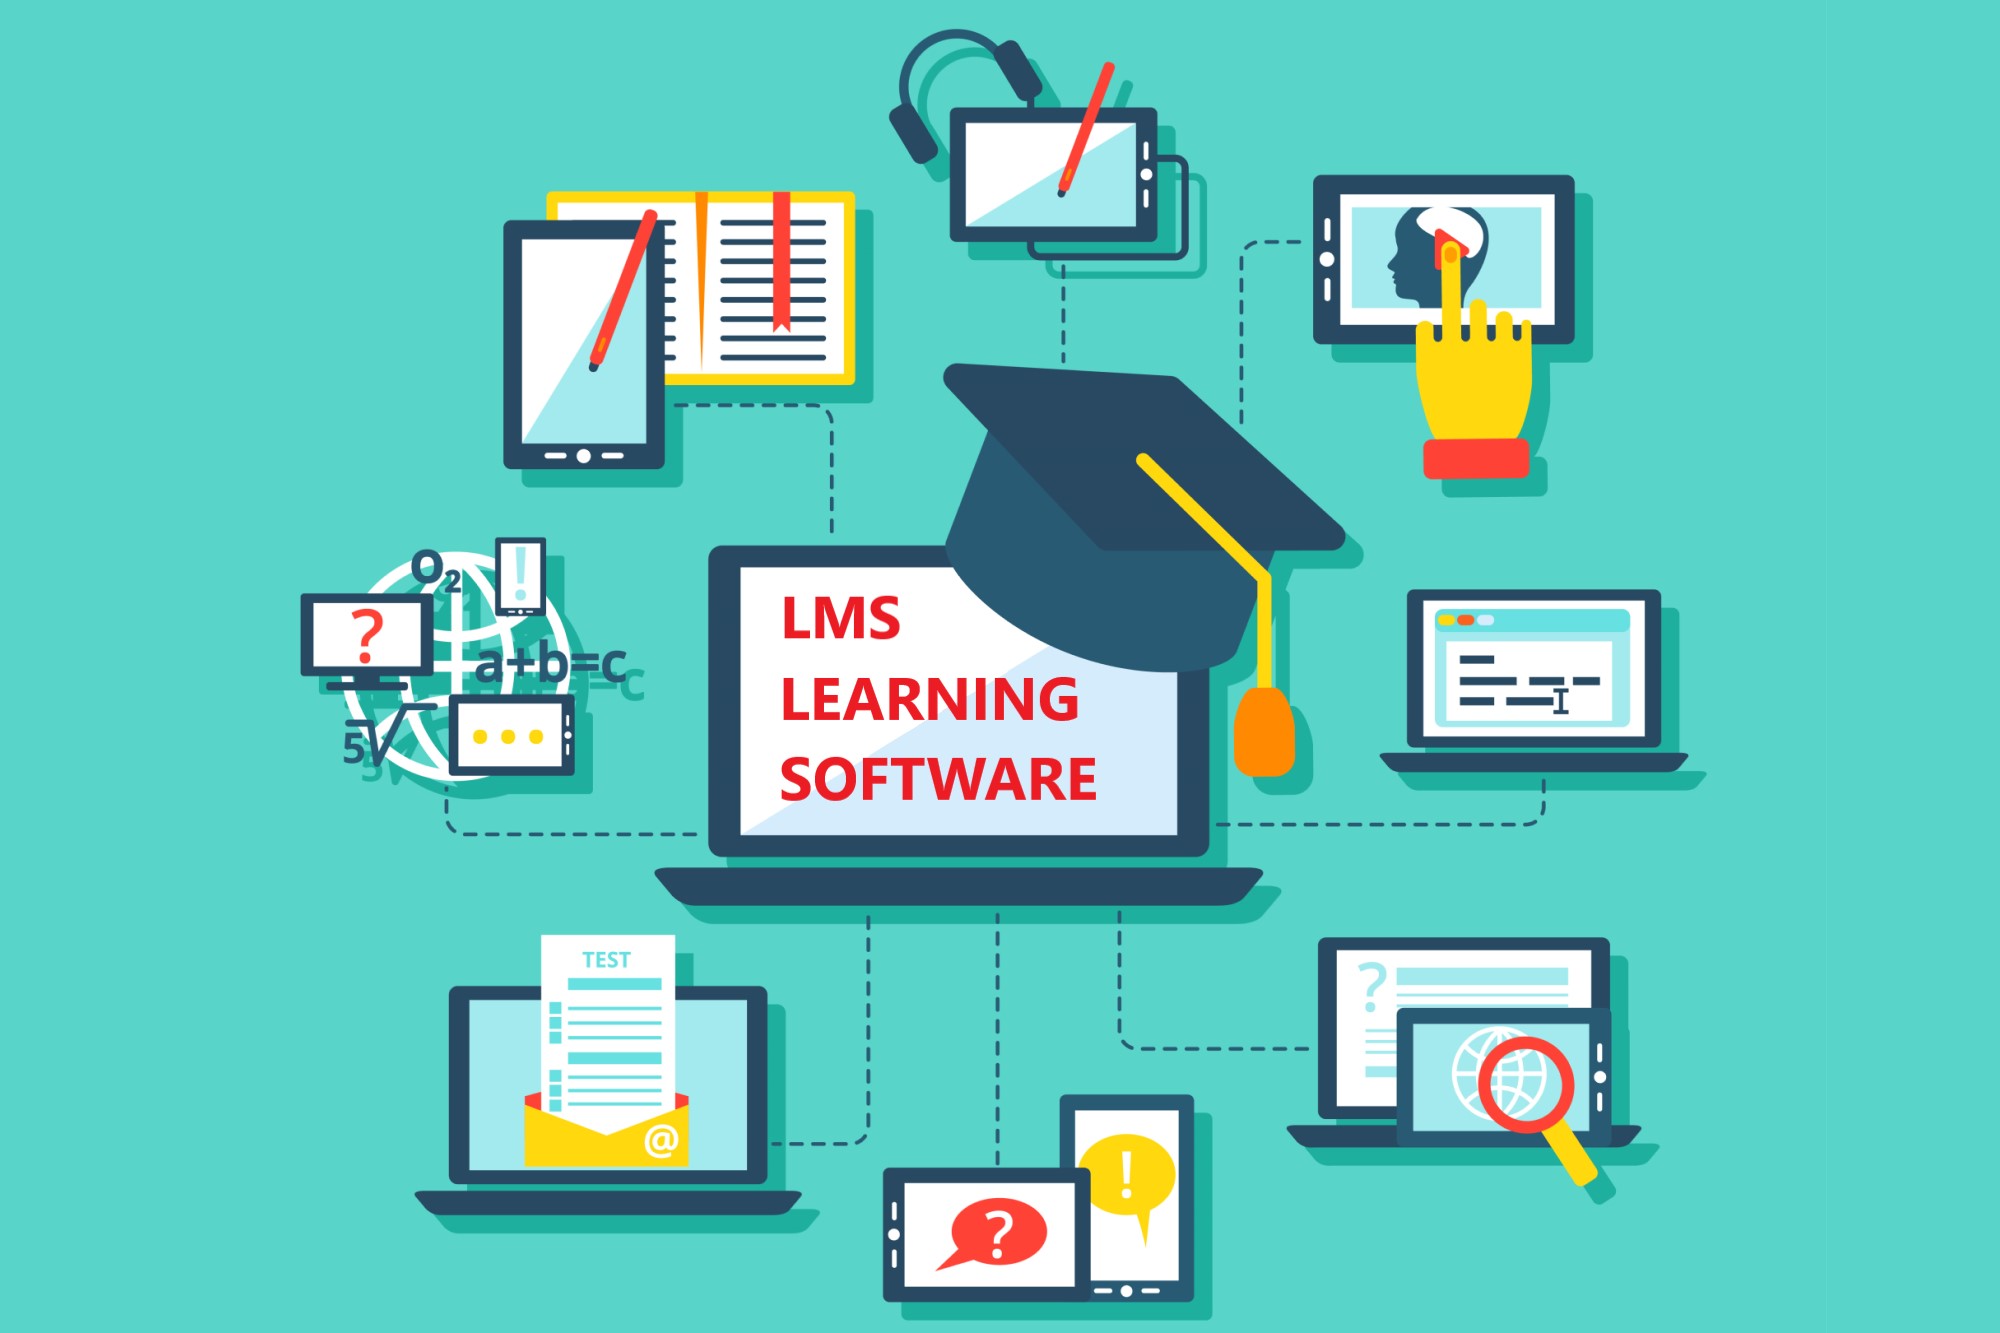 LMS Learning Software